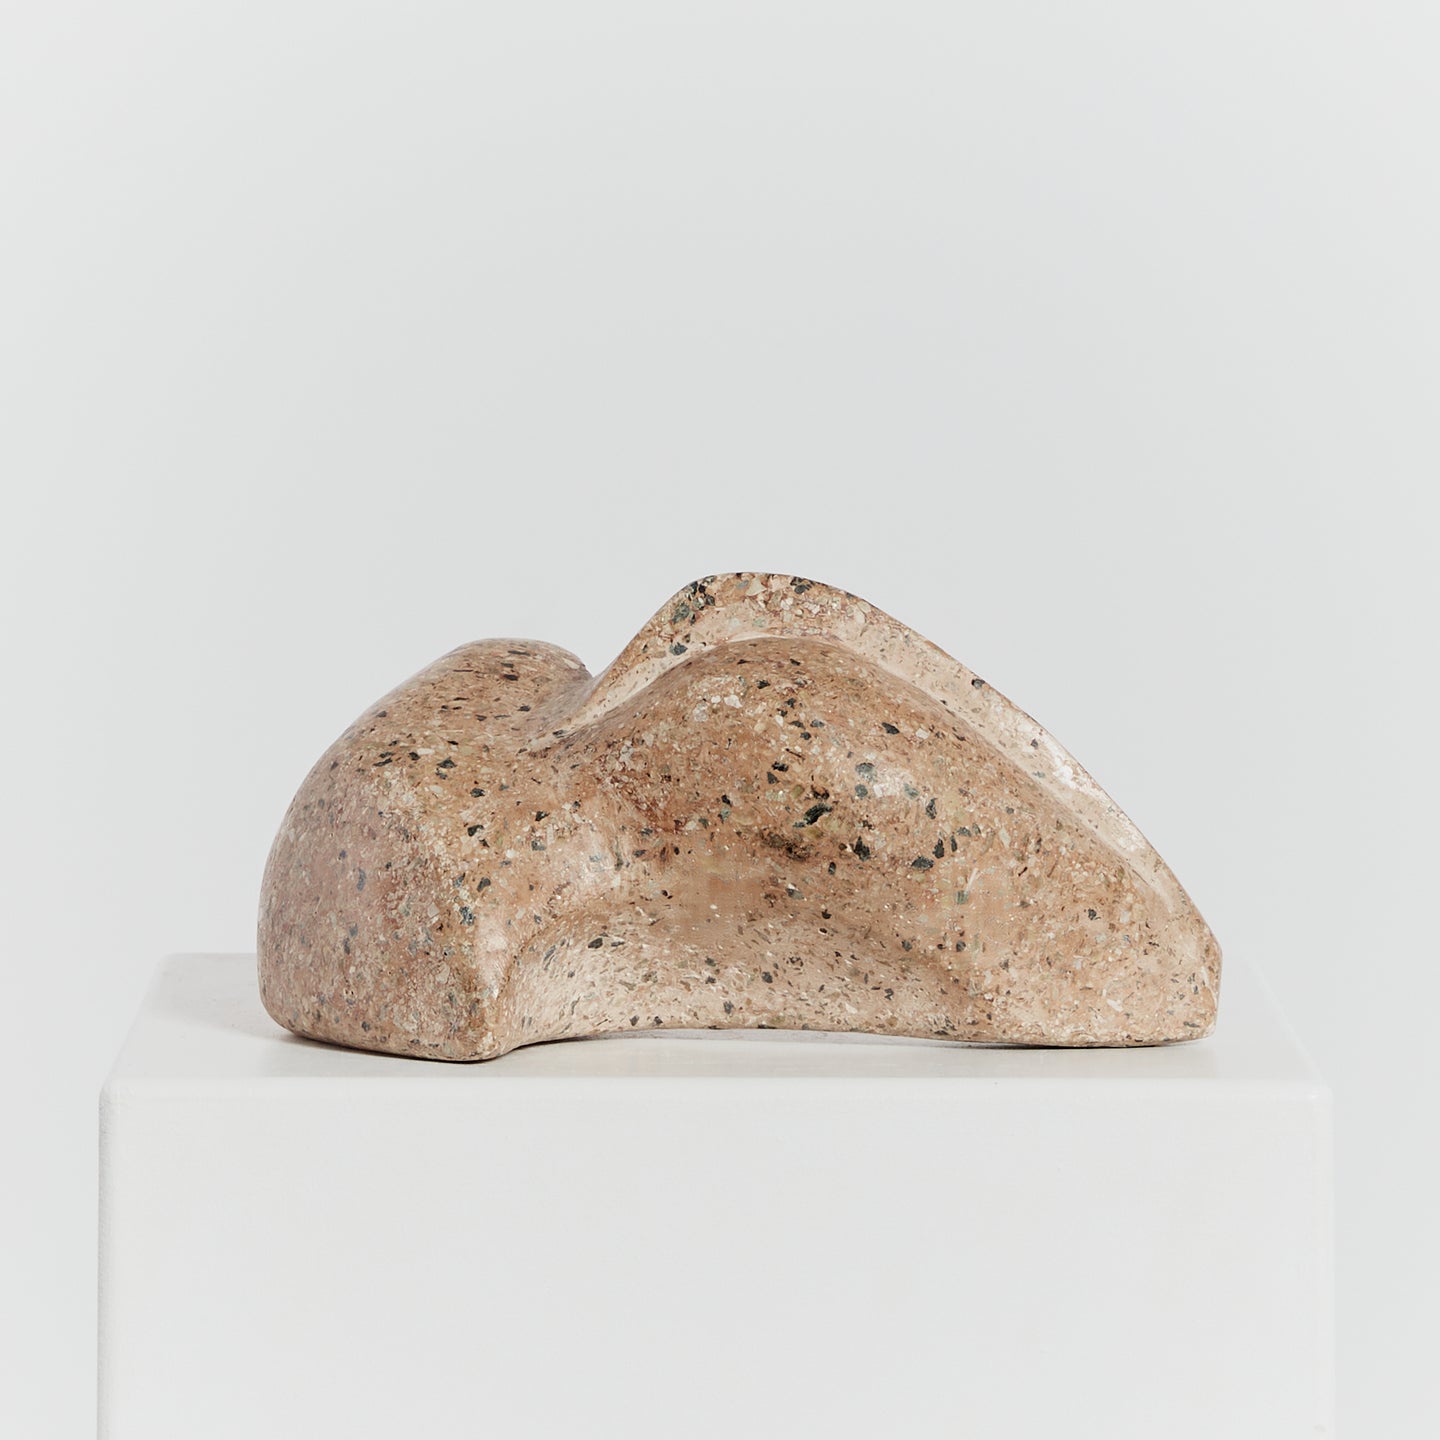 Biomorphic stone sculpture - HIRE ONLY